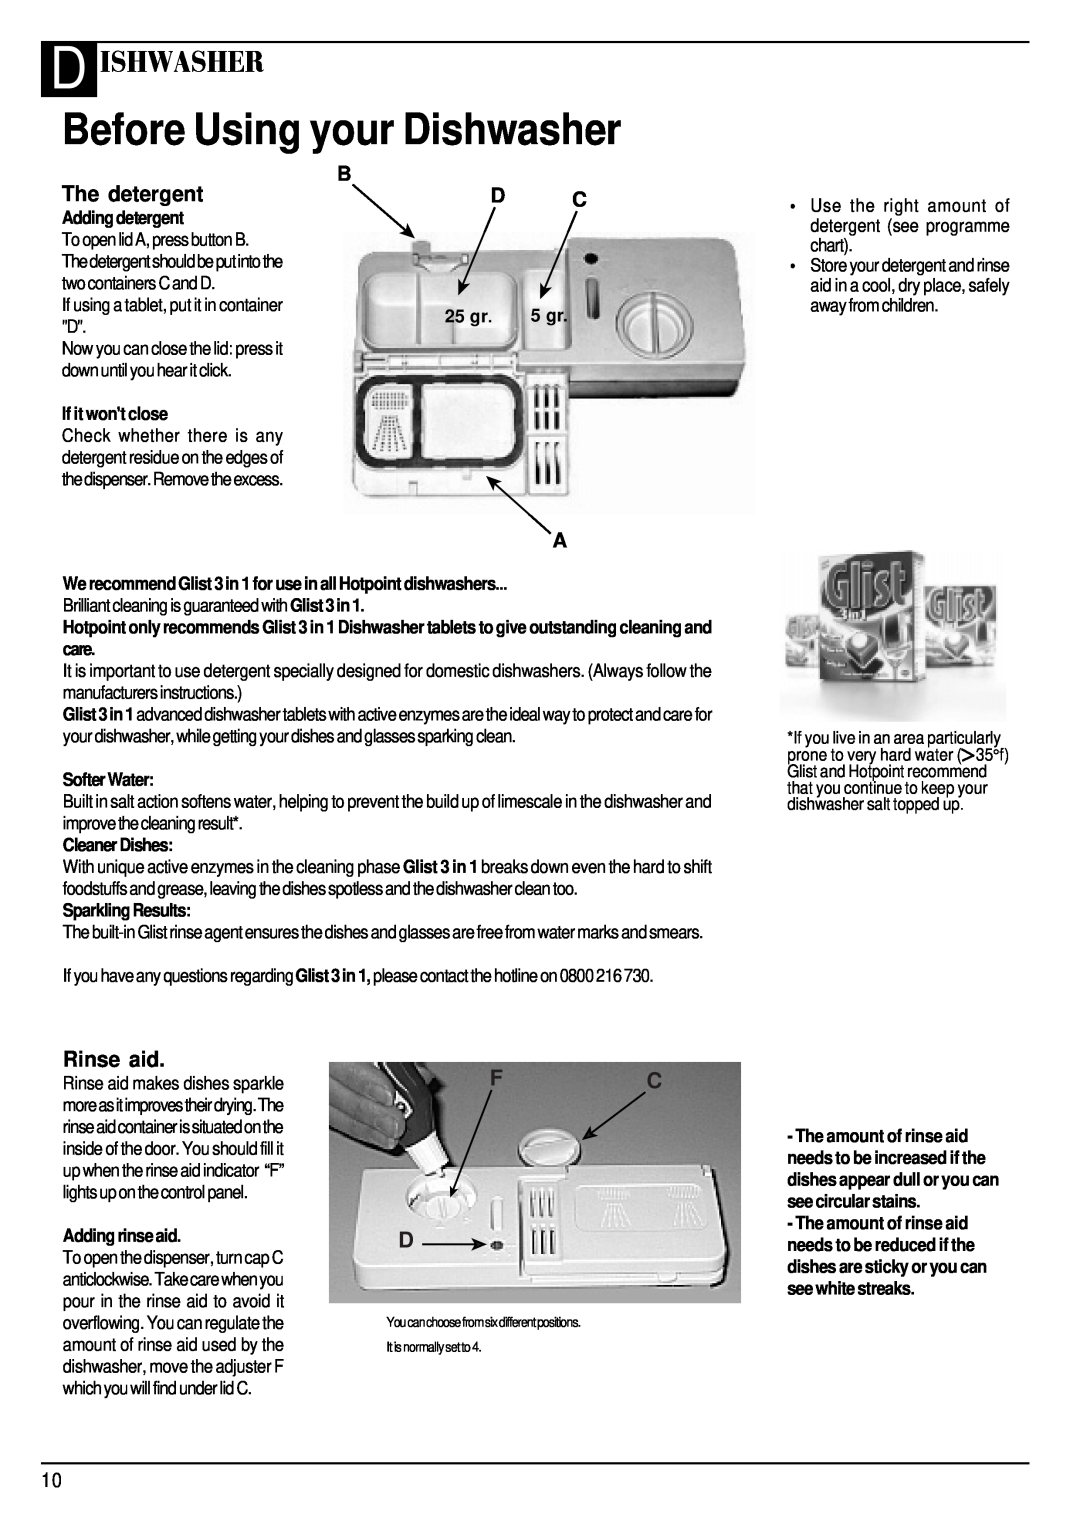 Hotpoint BFV68 manual Before Using your Dishwasher, D Ishwasher, The detergent, Rinse aid, Fc D, Adding detergent, 25 gr 